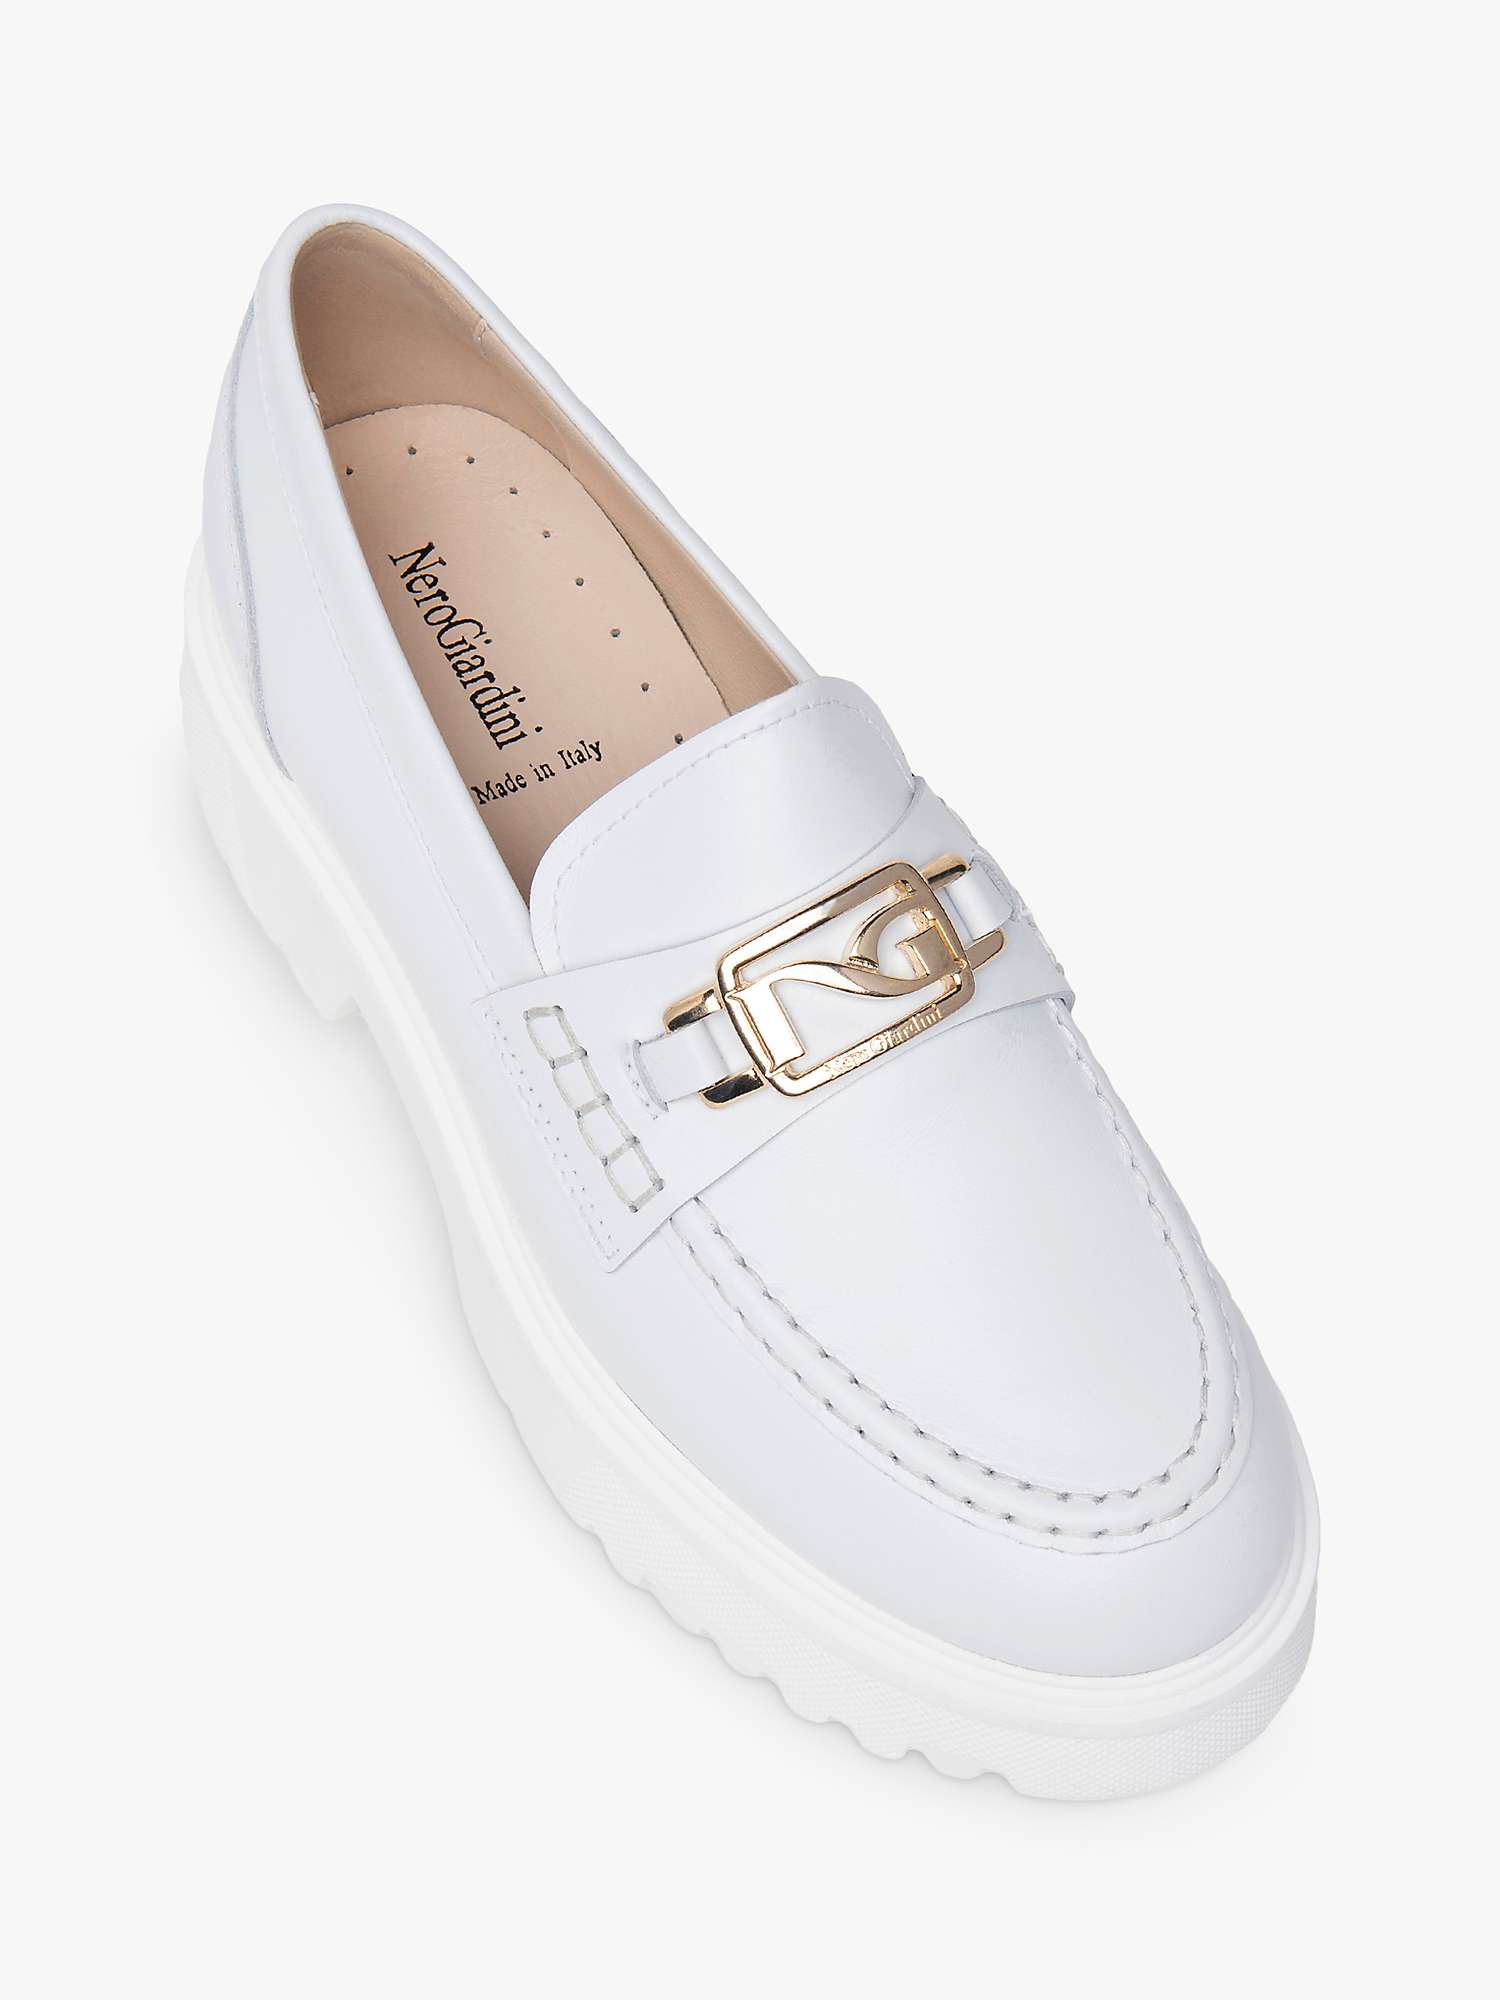 Buy NeroGiardini Leather Chunky Loafers Online at johnlewis.com